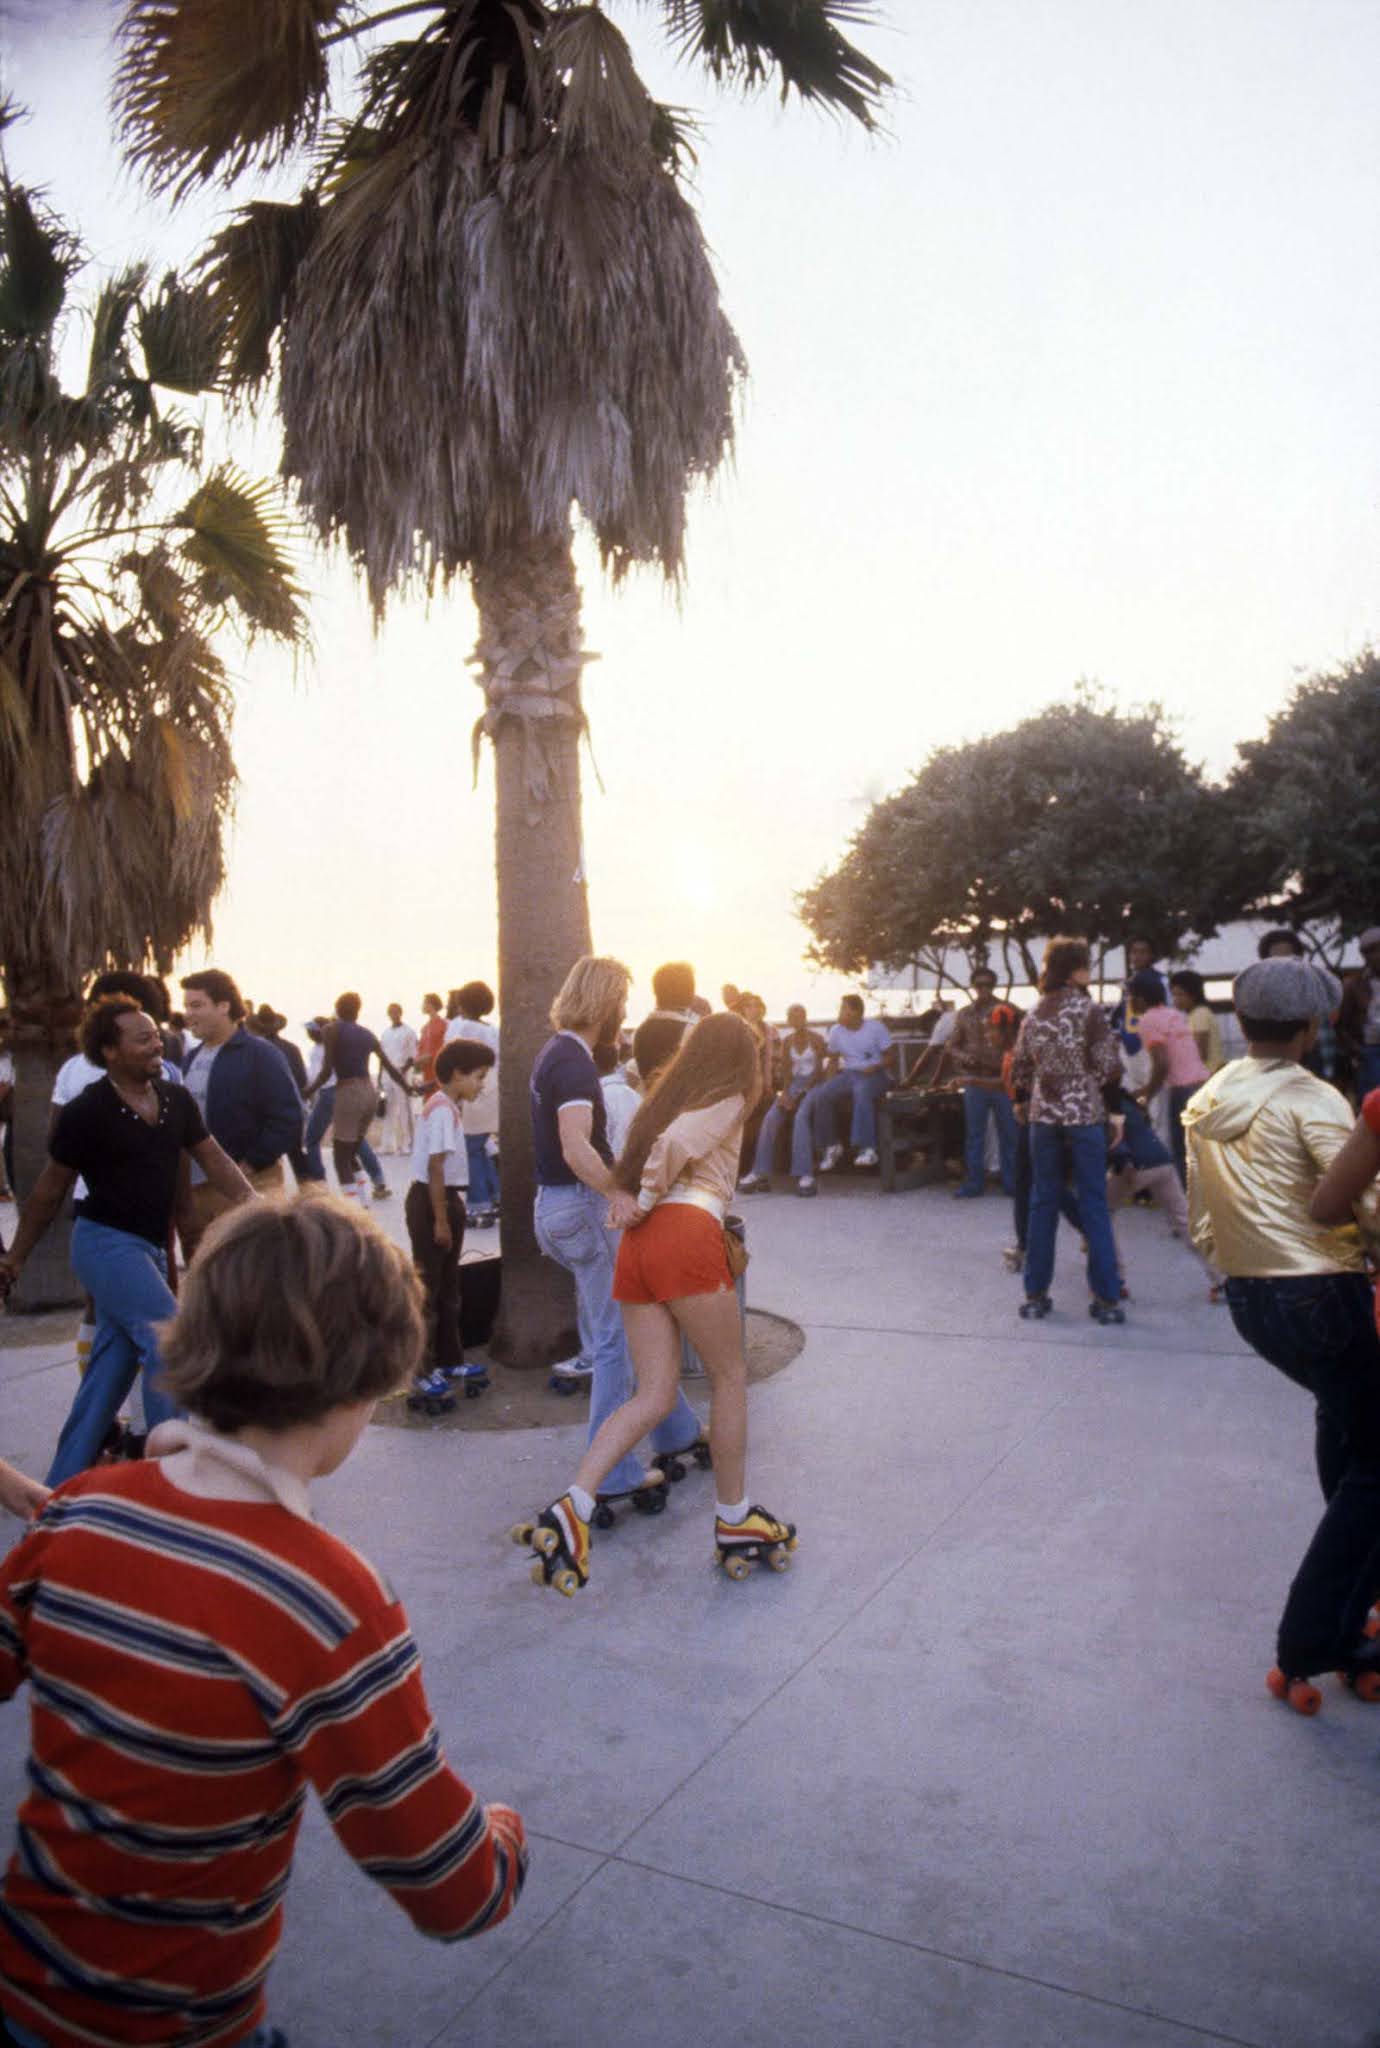 The roller skaters of Venice Beach, 1979